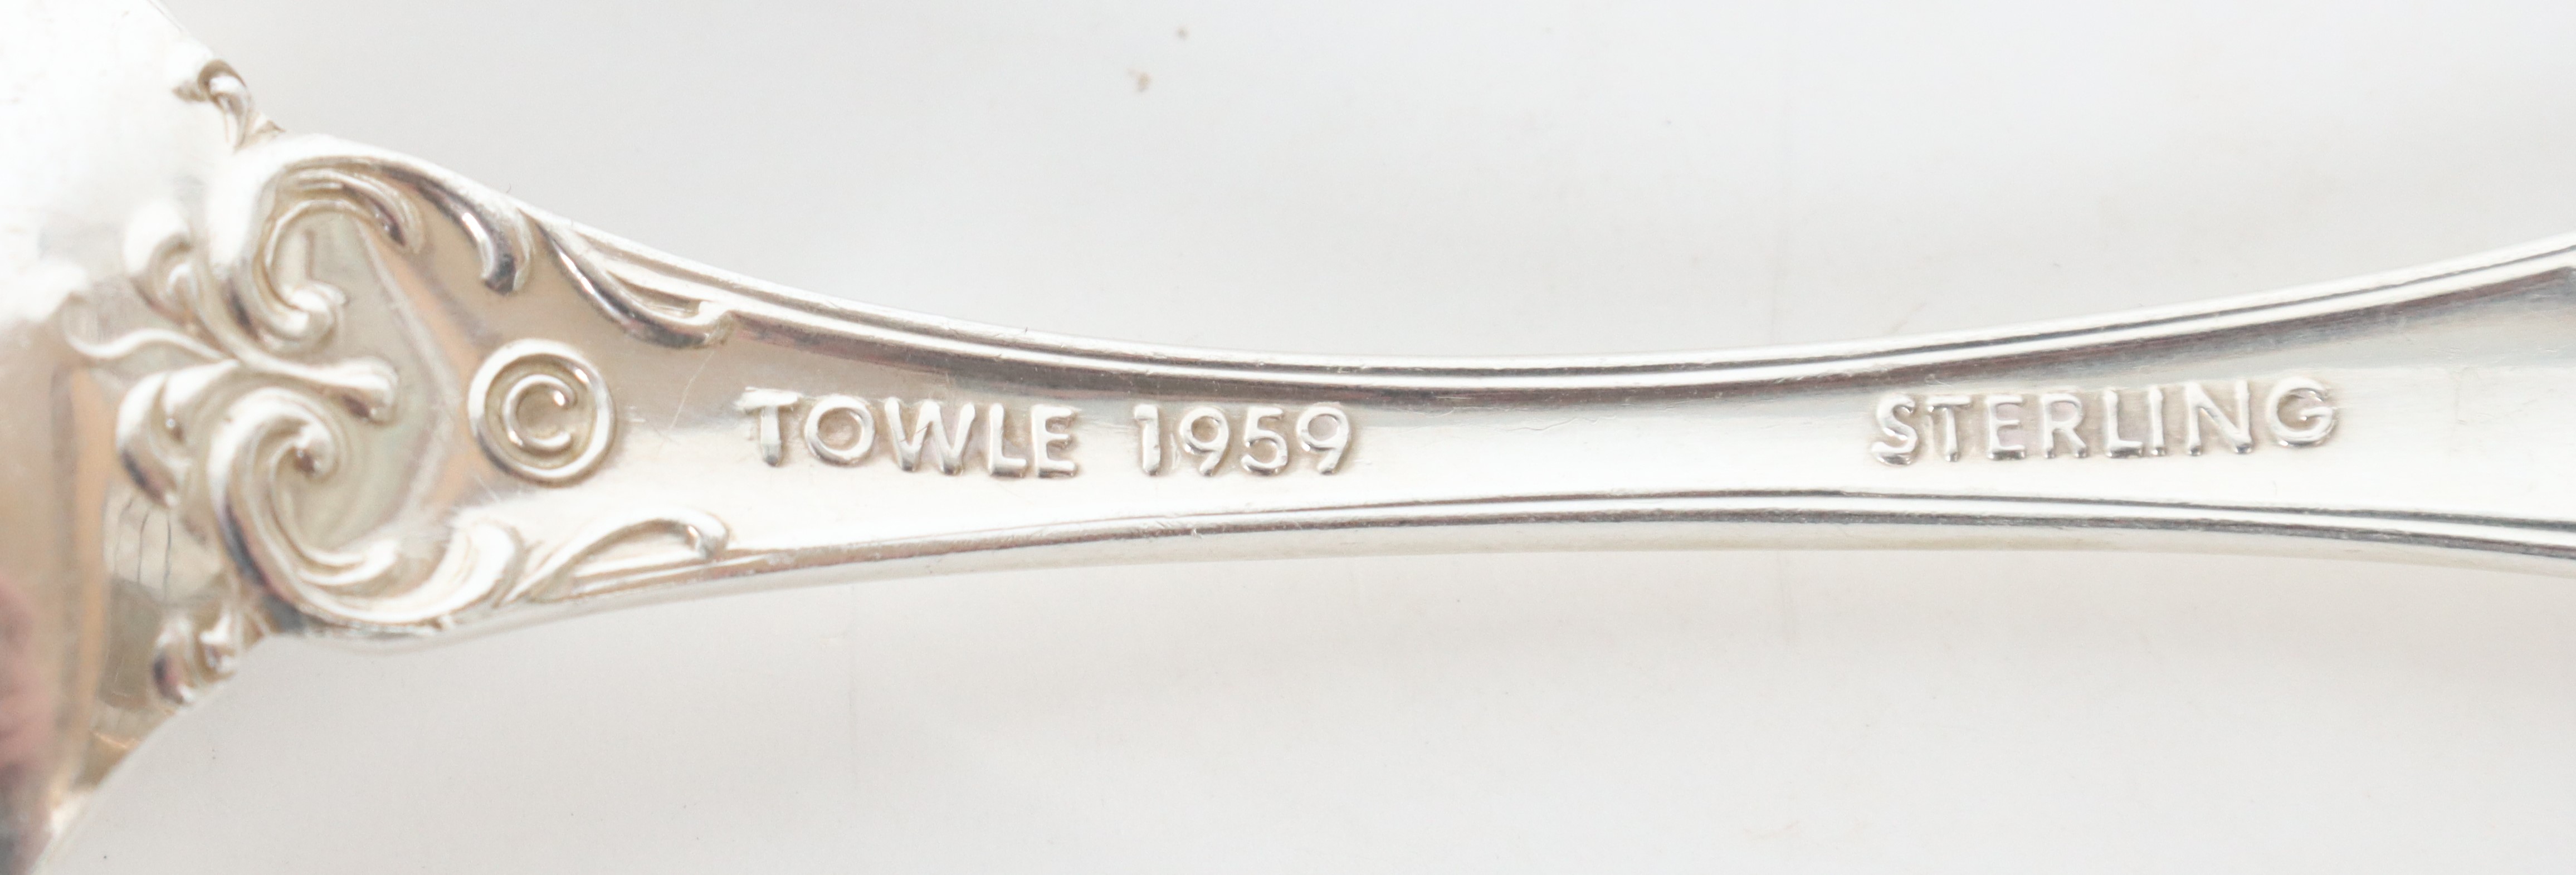 (51) Pc 1959 Towle Sterling Silverware Set, 81 OZT - Image 7 of 11